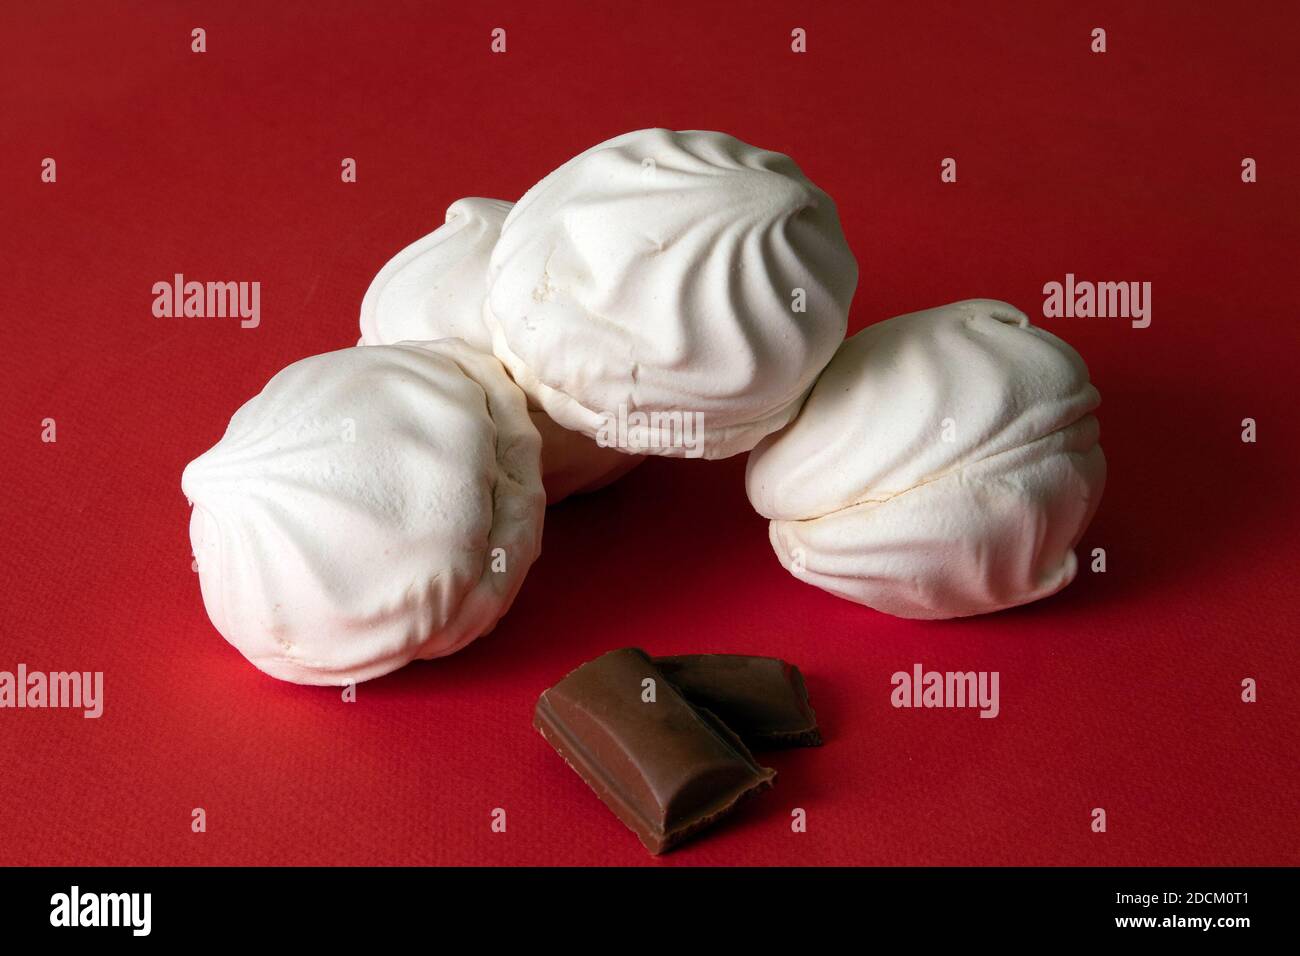 Four white delicate zephyrs and little pieces of chocolate against bright red saturated background Stock Photo